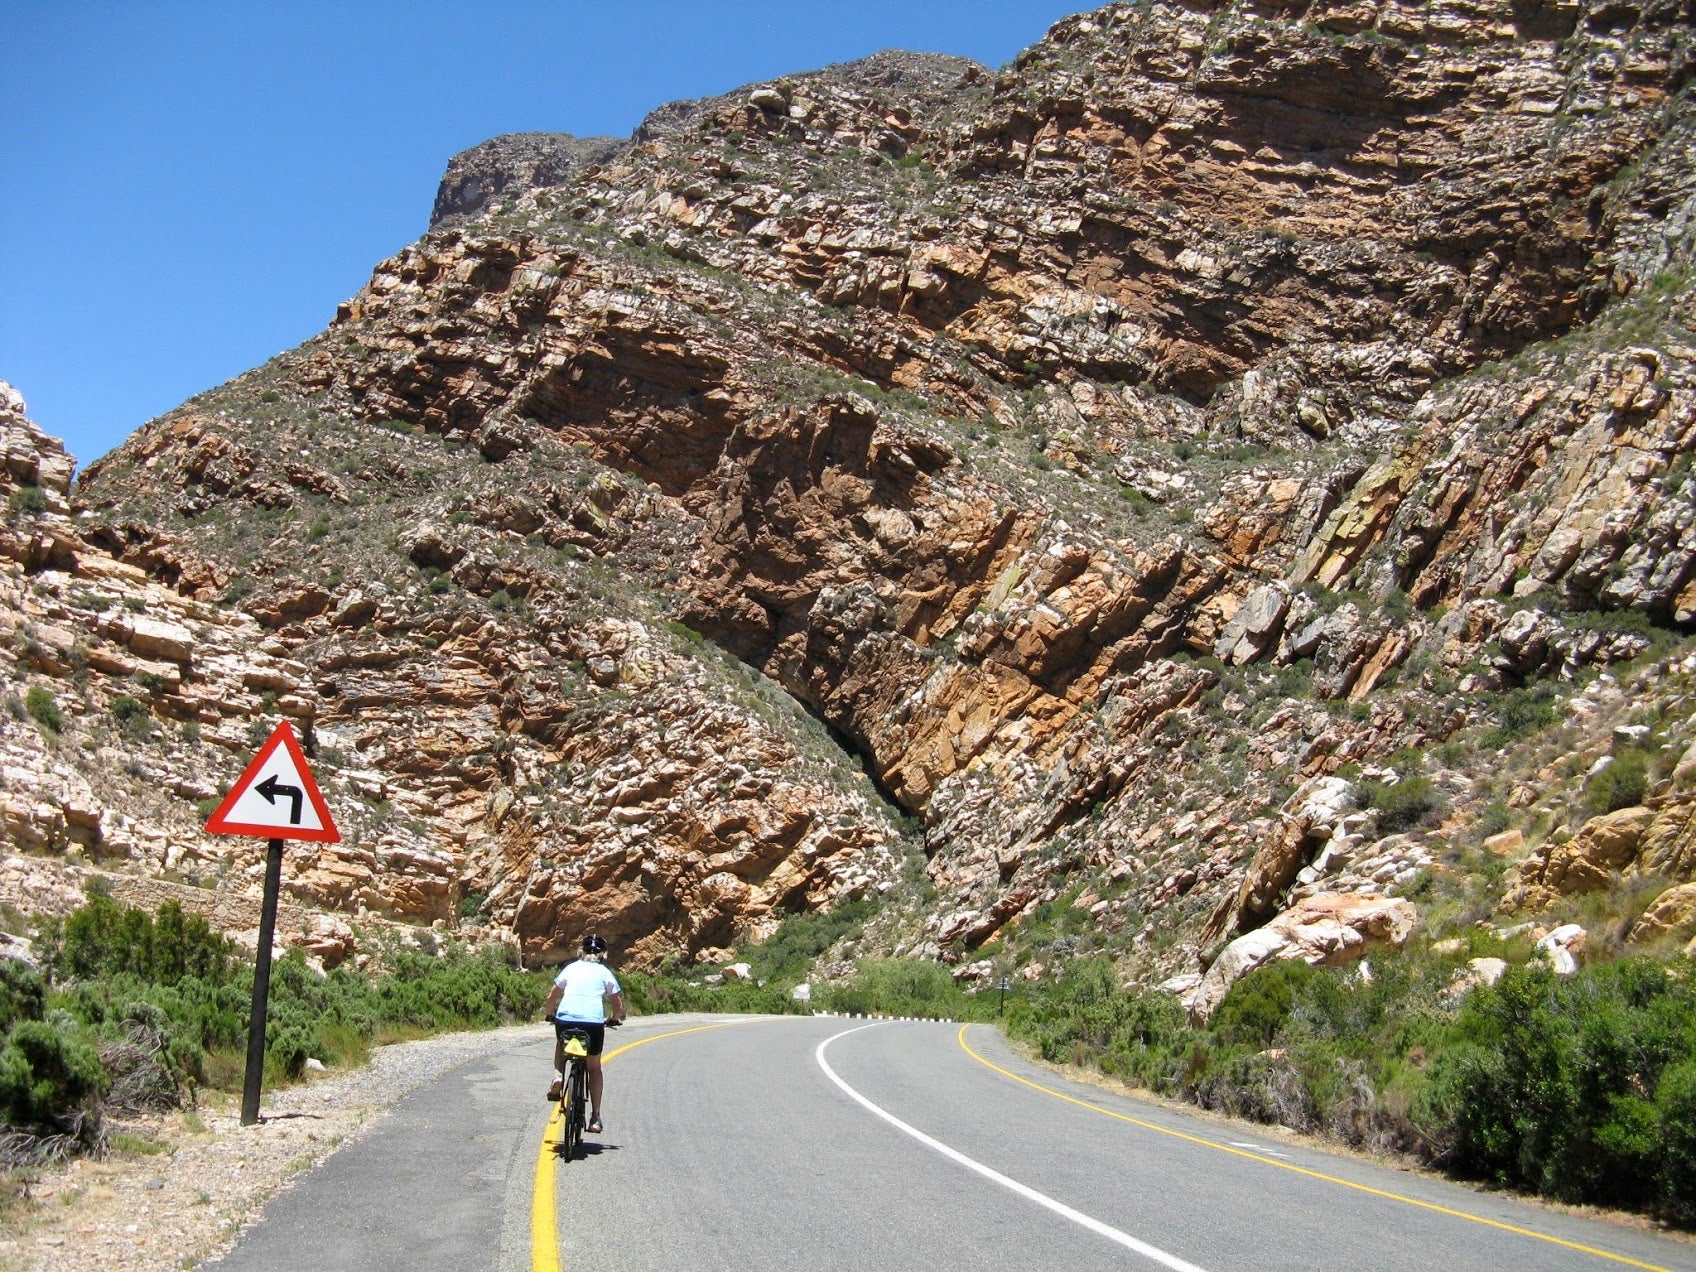 Cycling is an ideal way to see the Western Cape